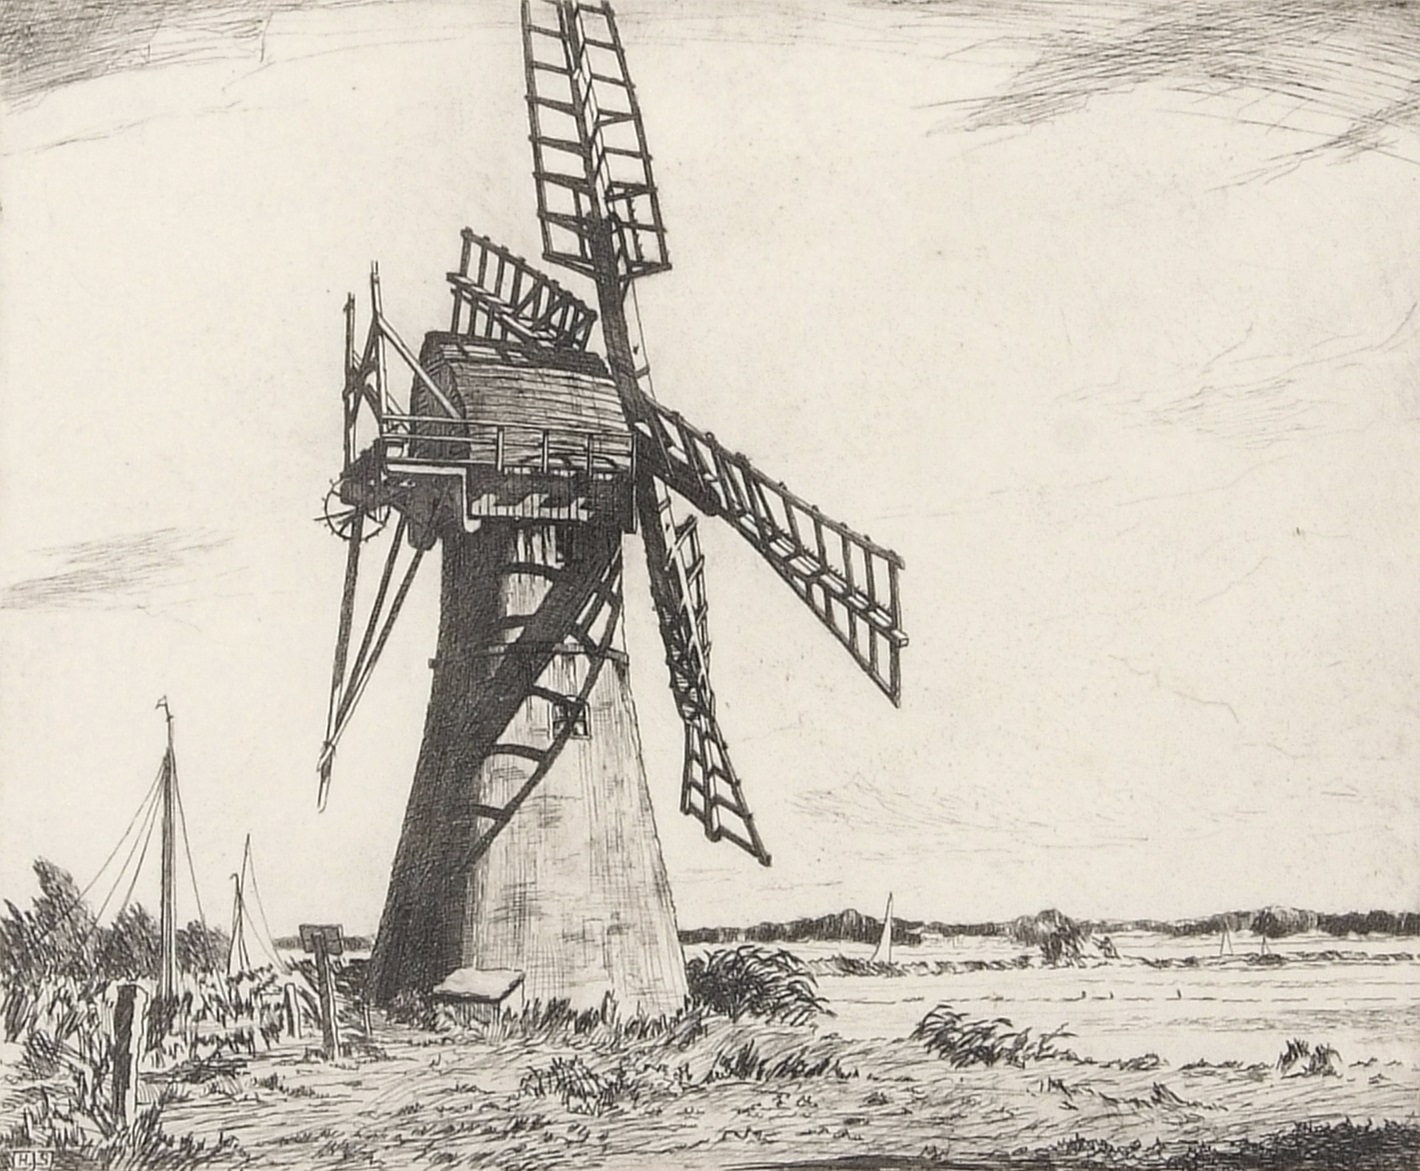 "Thurne Mill Norfolk" by Henry James Starling